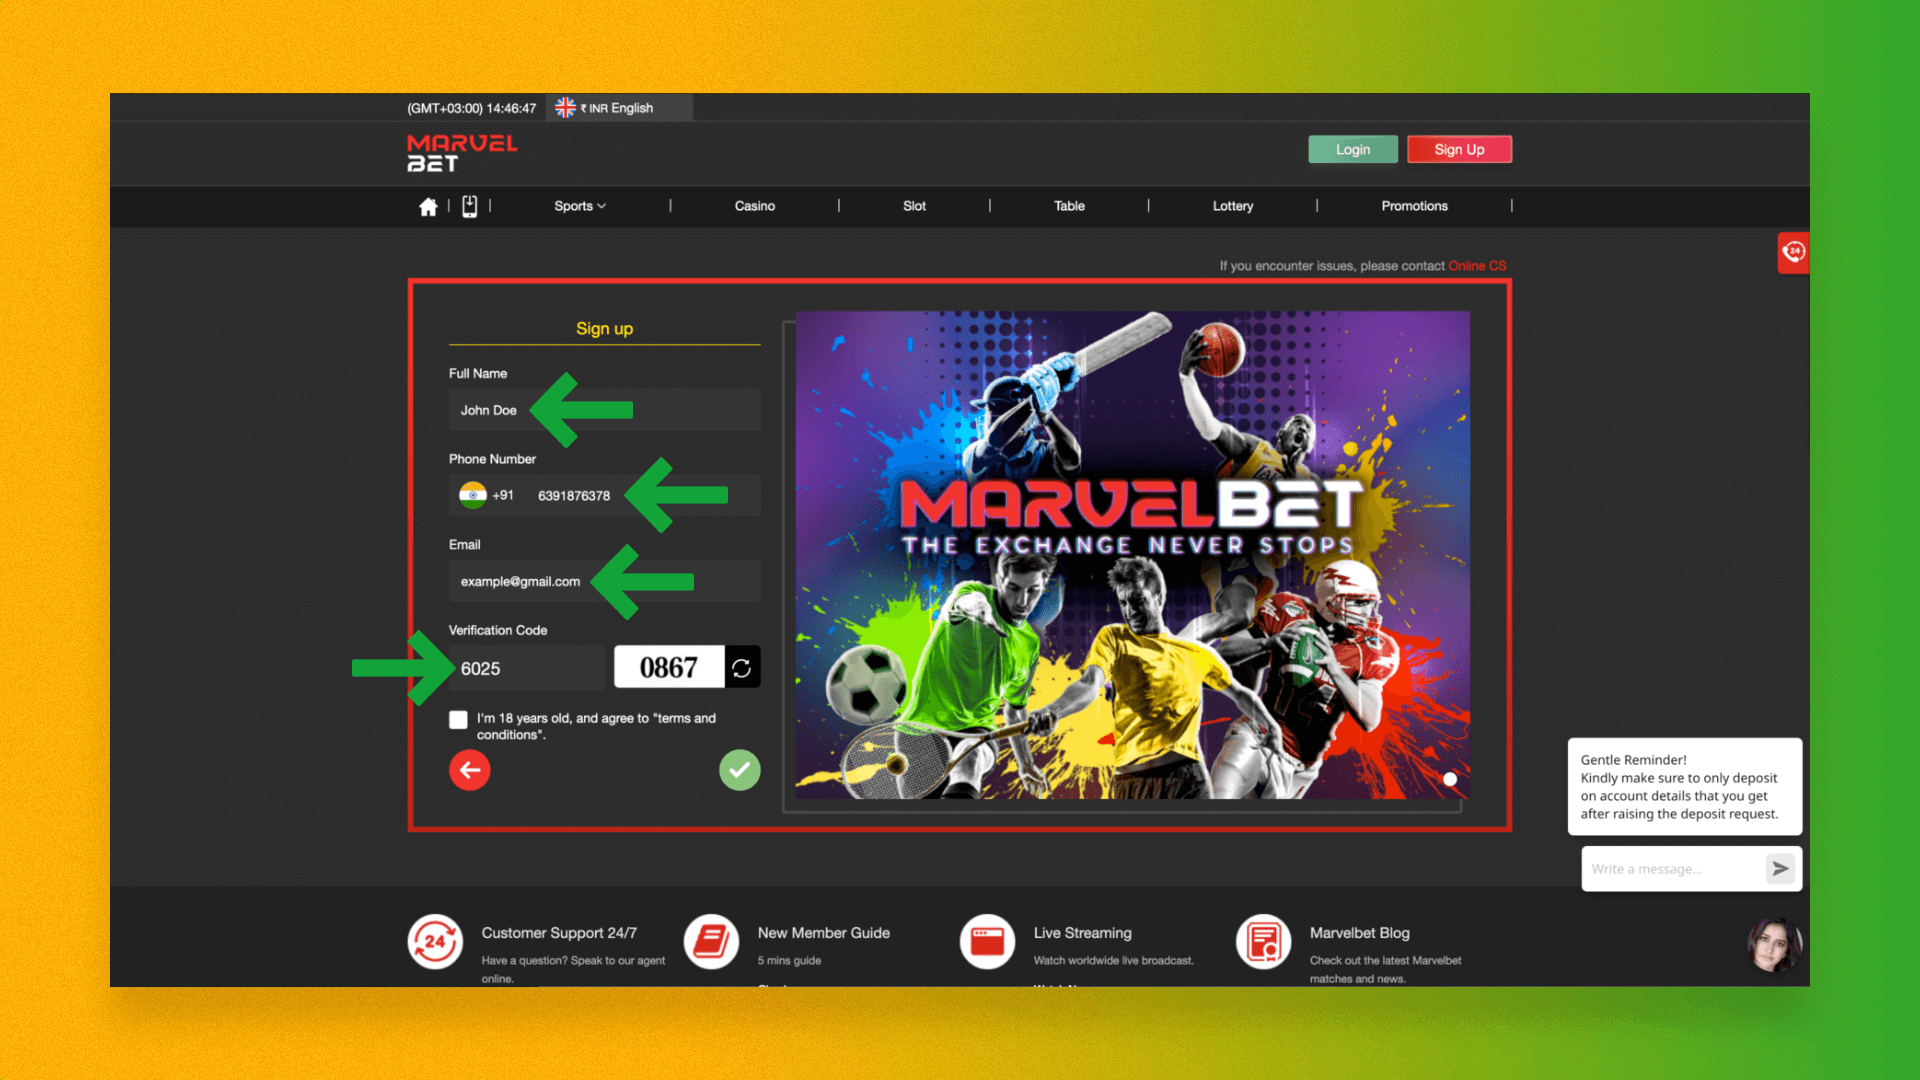 Registration in Marvelbet takes place in several steps